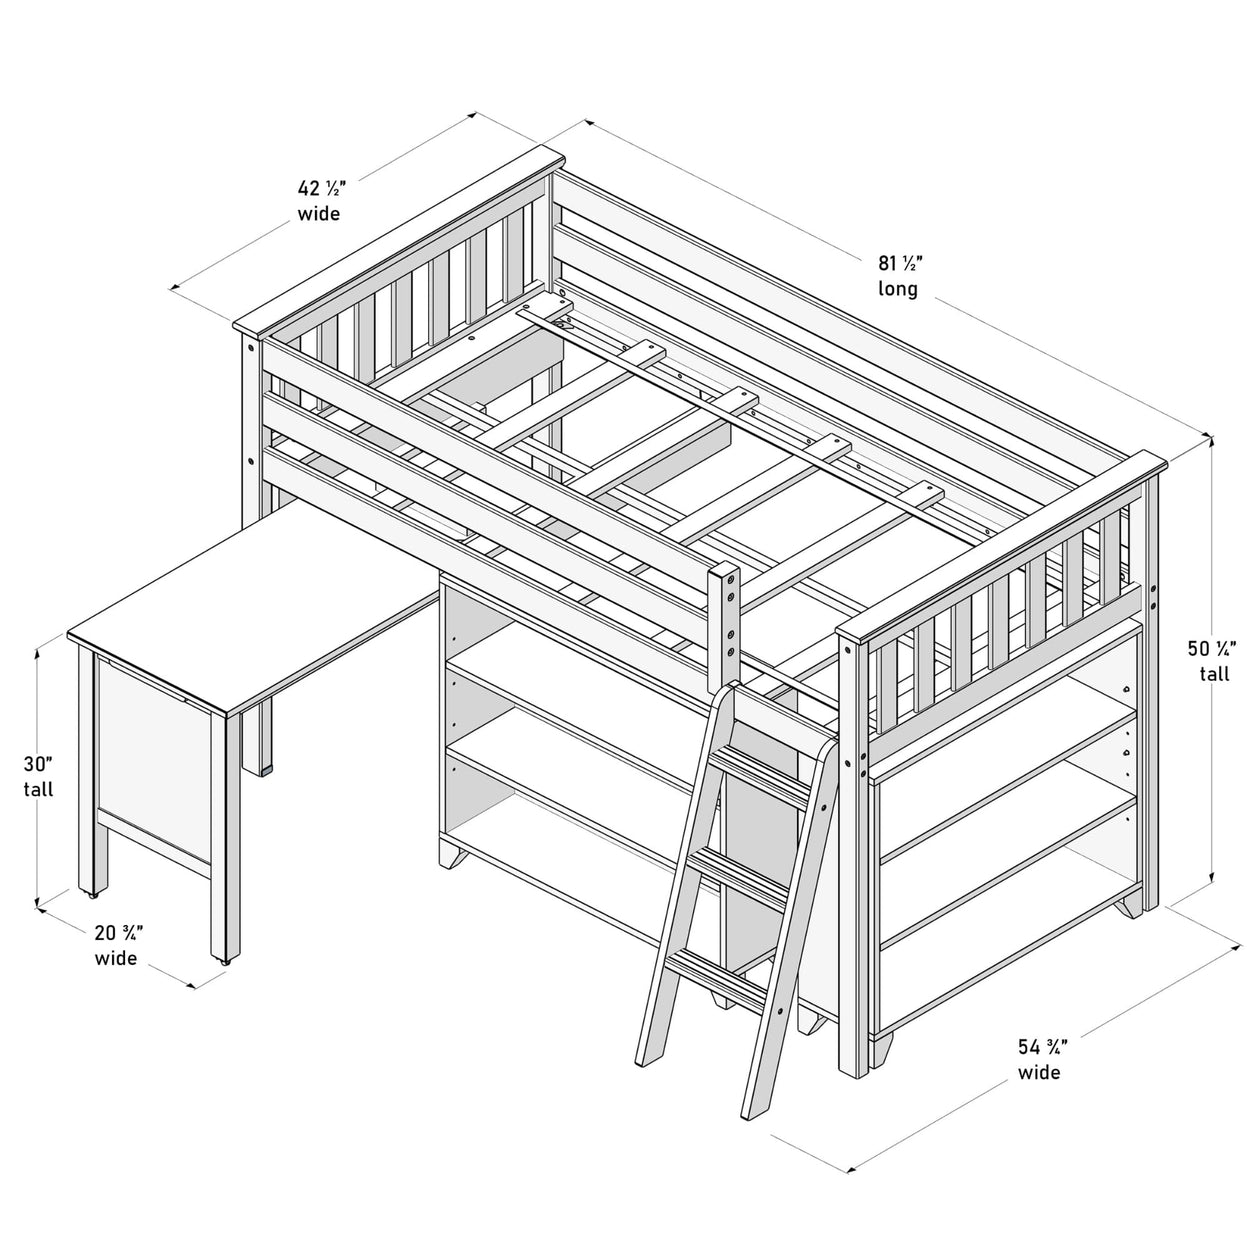 18-3B3BDK-151 : Loft Beds Twin-Size Low Loft with Pull-Out Desk and 3-Shelf Bookcases, Clay